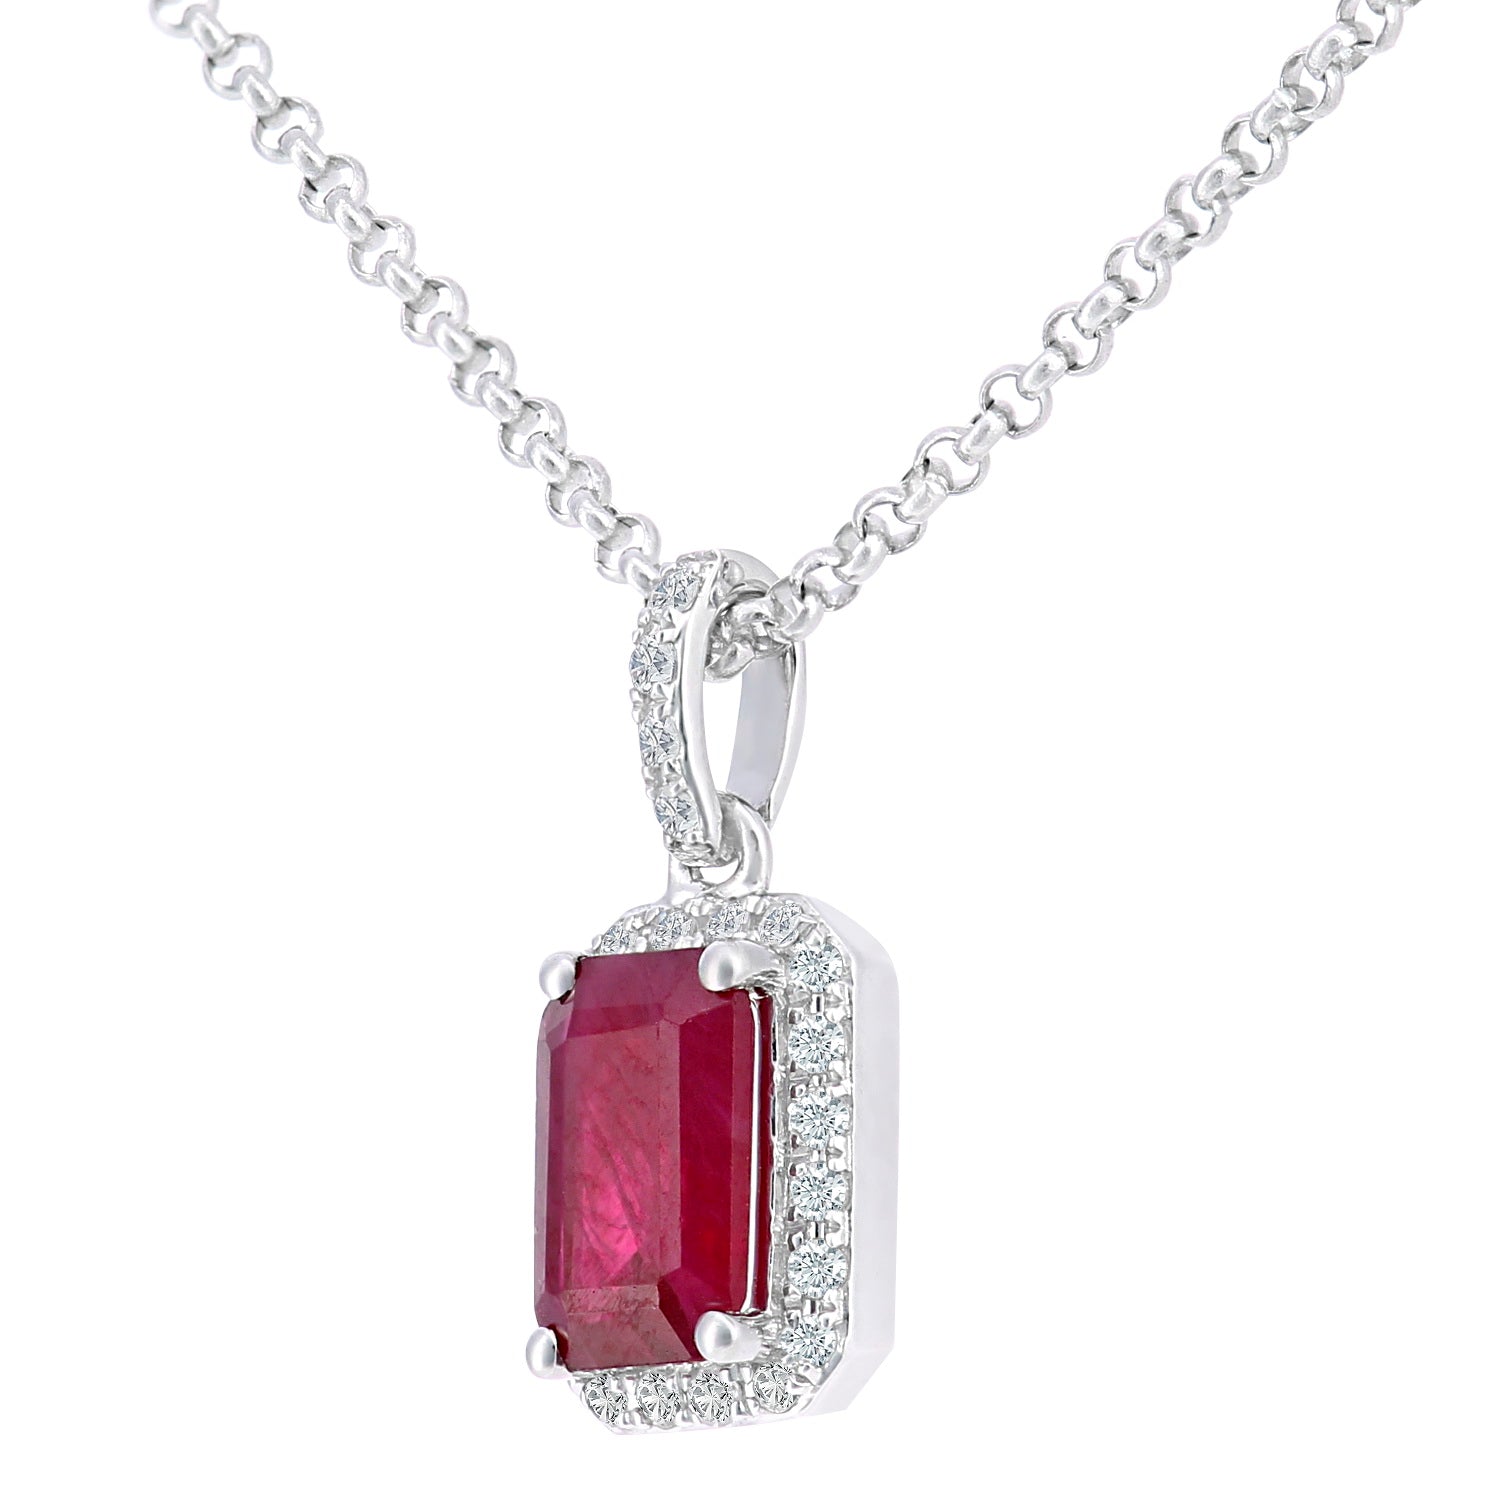 18ct White Gold  Diamond Octagon 0.6ct Ruby Cluster Necklace 16" - DP1AXL604W18RU